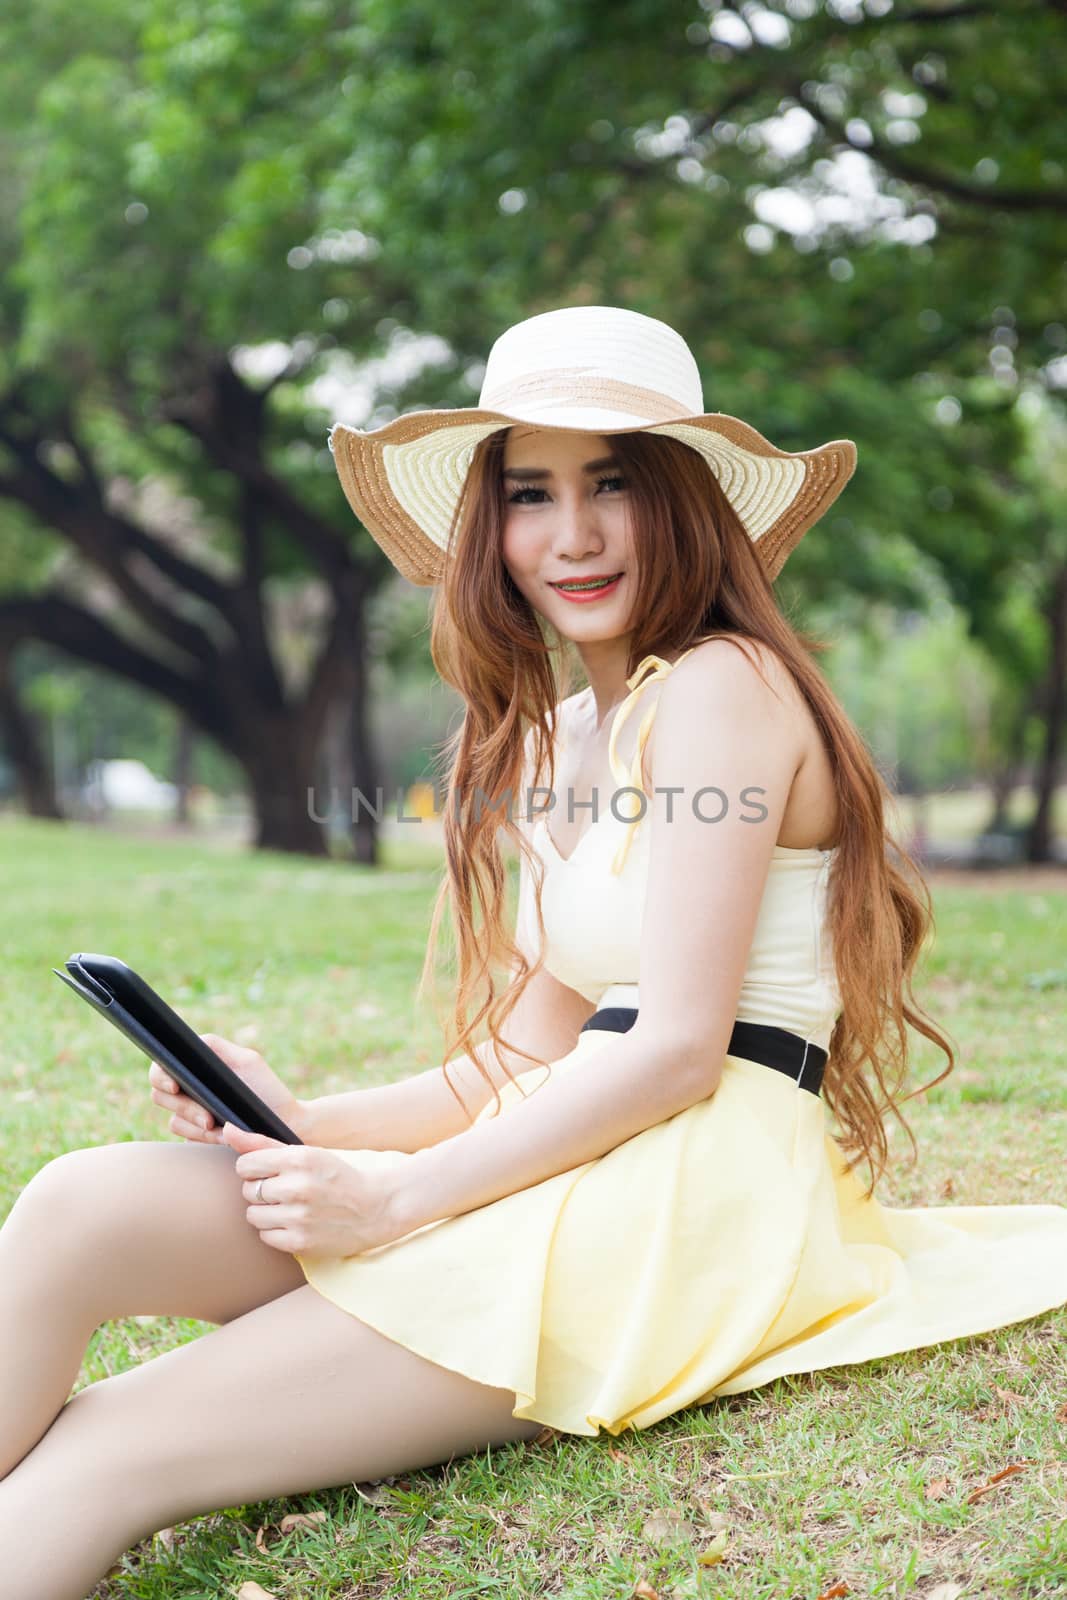 Woman sitting on grass and using a tablet. Located within the park.